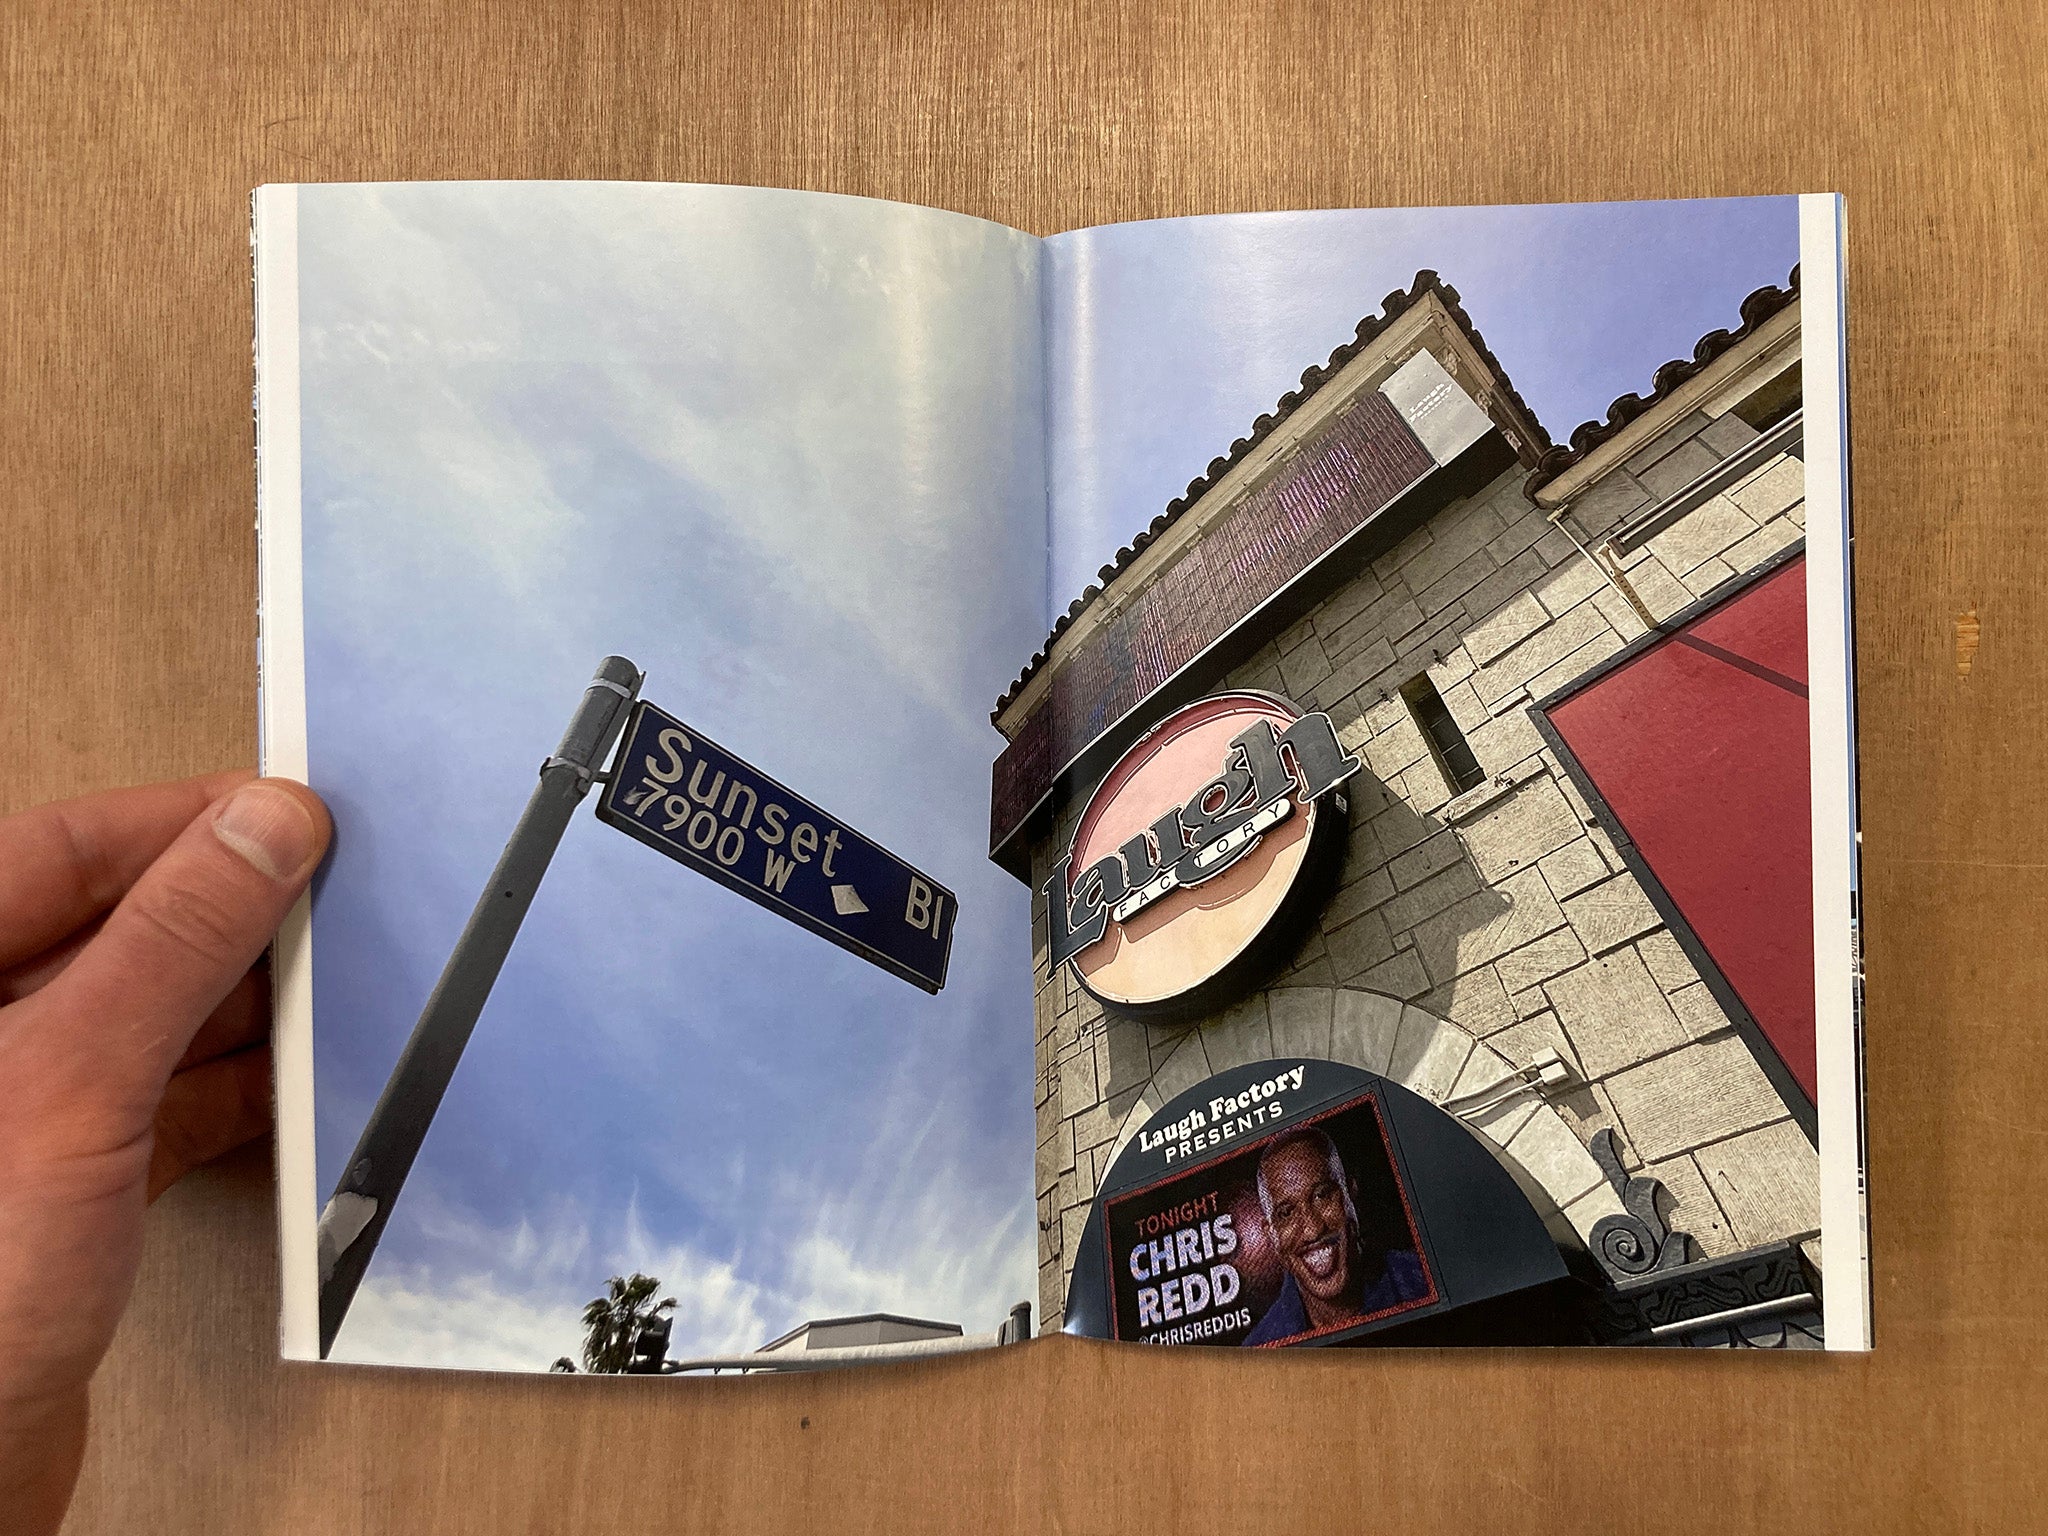 L.A. SIGNS ZINE SERIES: VENUES by Paul Price